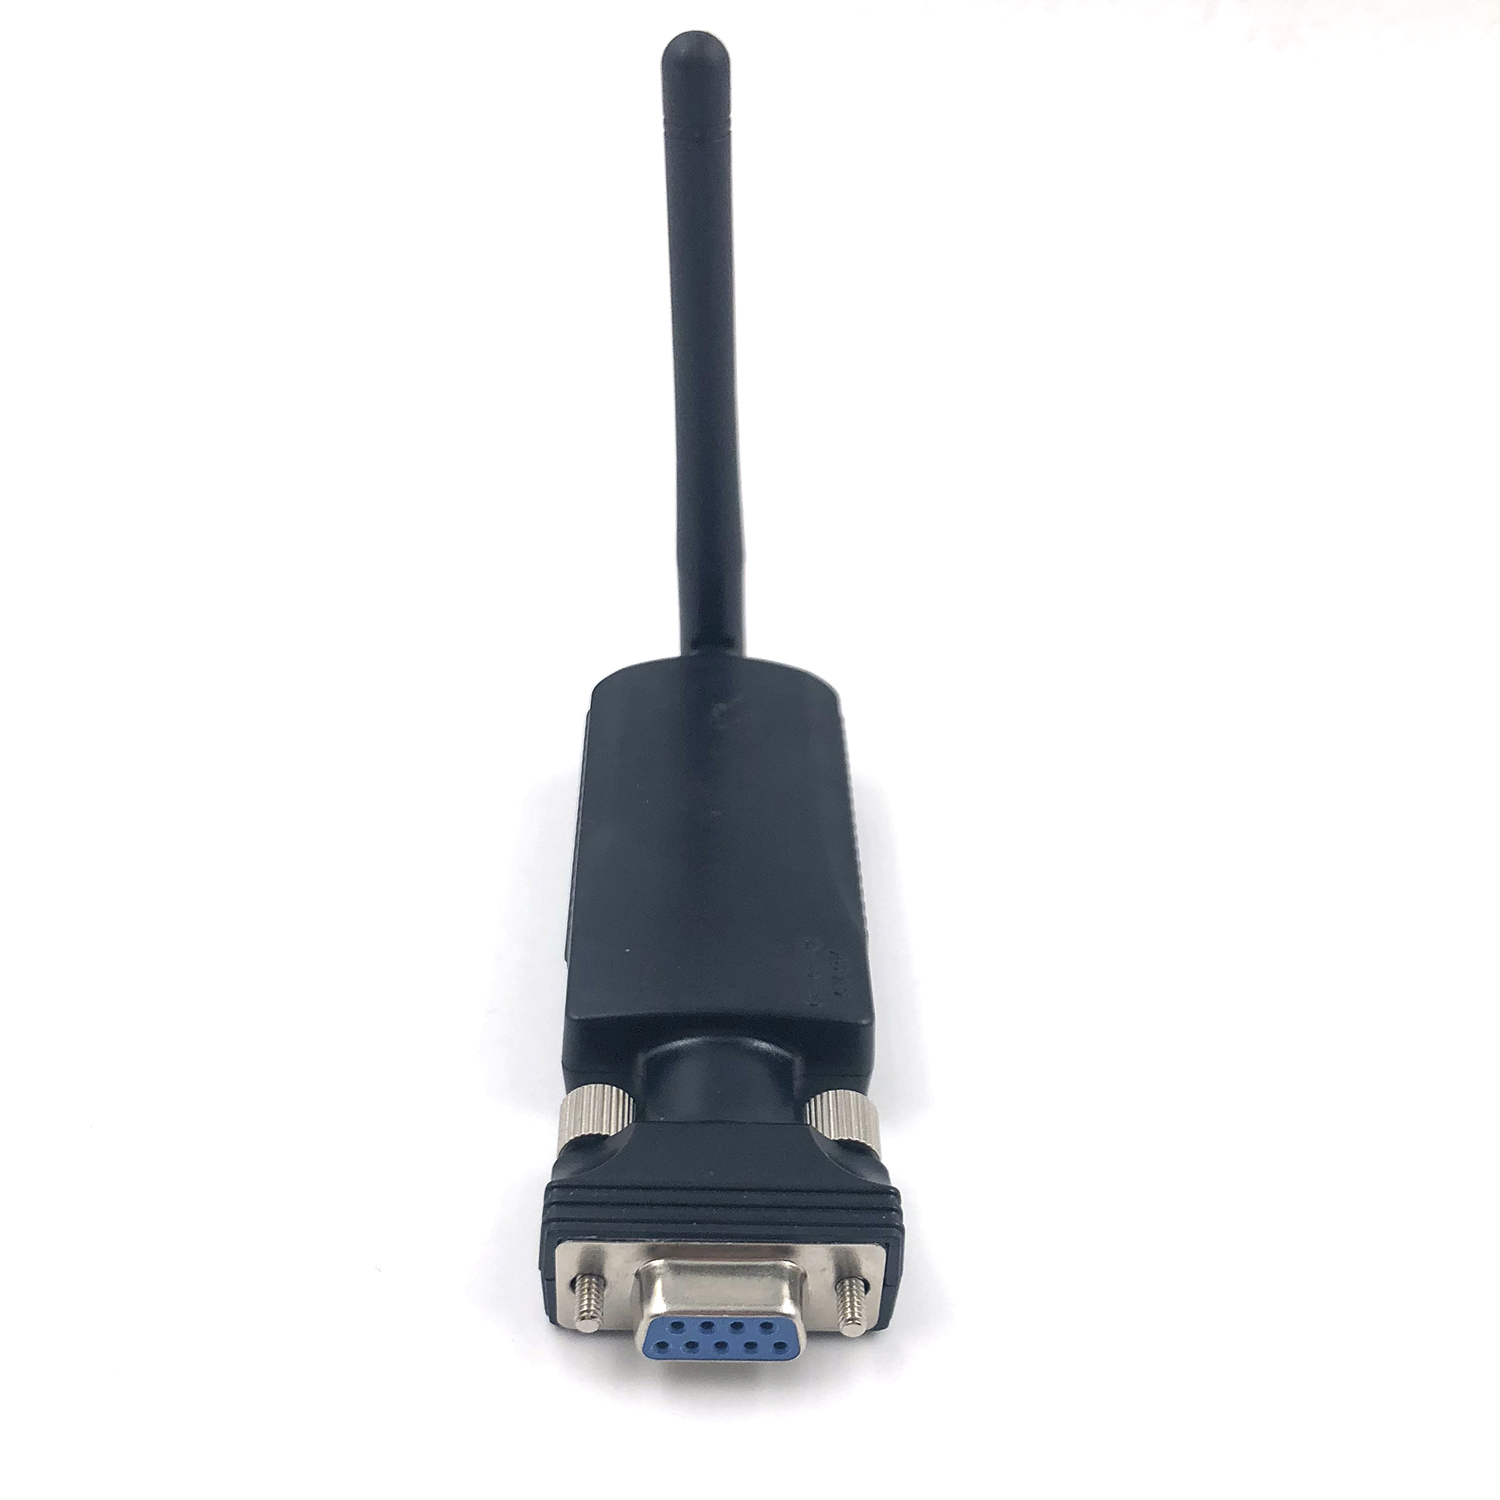 Serial Bluetooth RS232 adapter